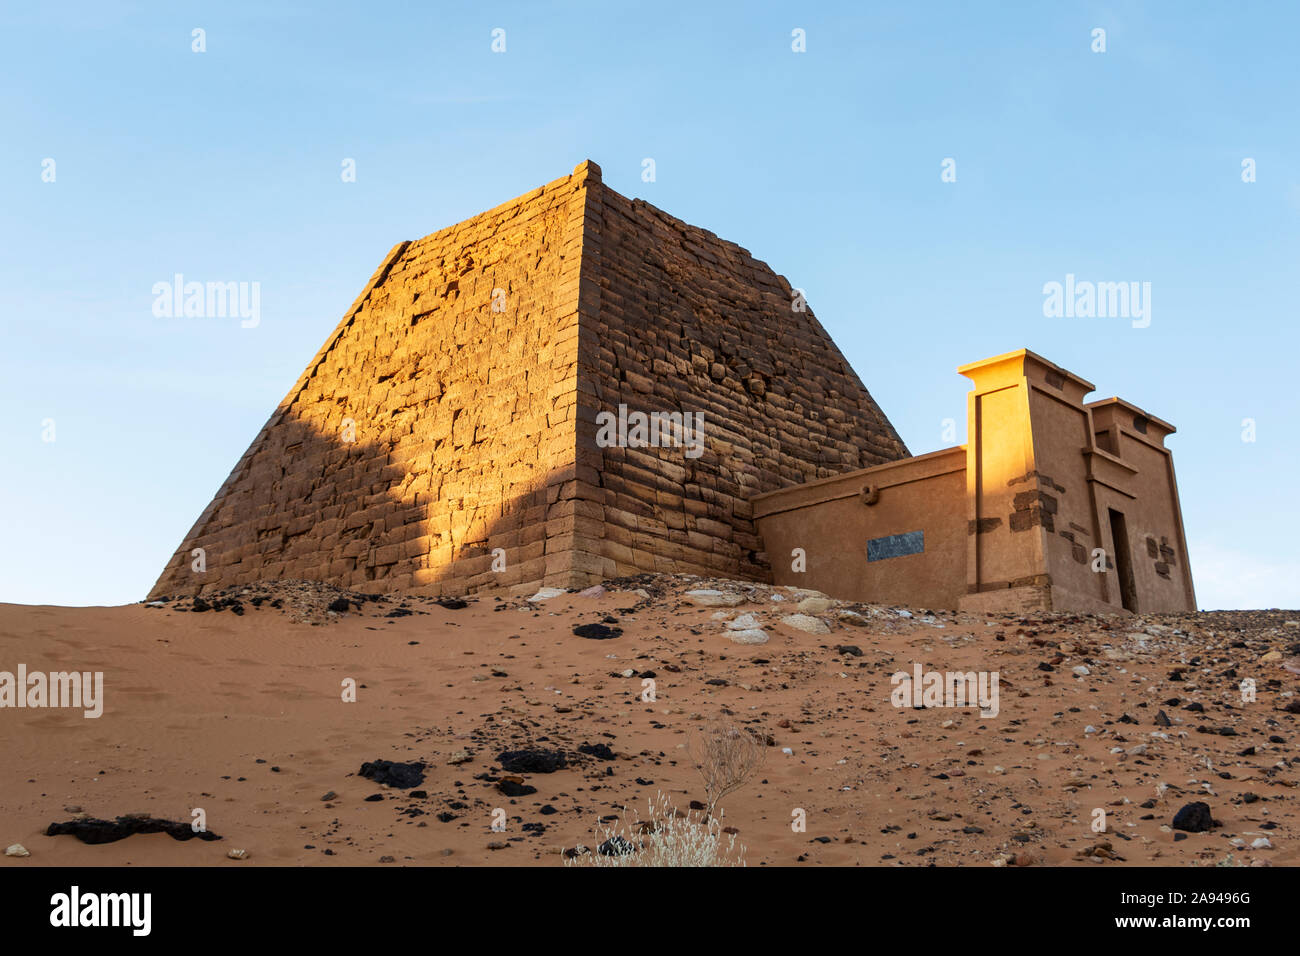 Pyramids and reconstructed chapel in the Northern Cemetery at Begarawiyah, containing 41 royal pyramids of the monarchs who ruled the Kingdom of Ku... Stock Photo